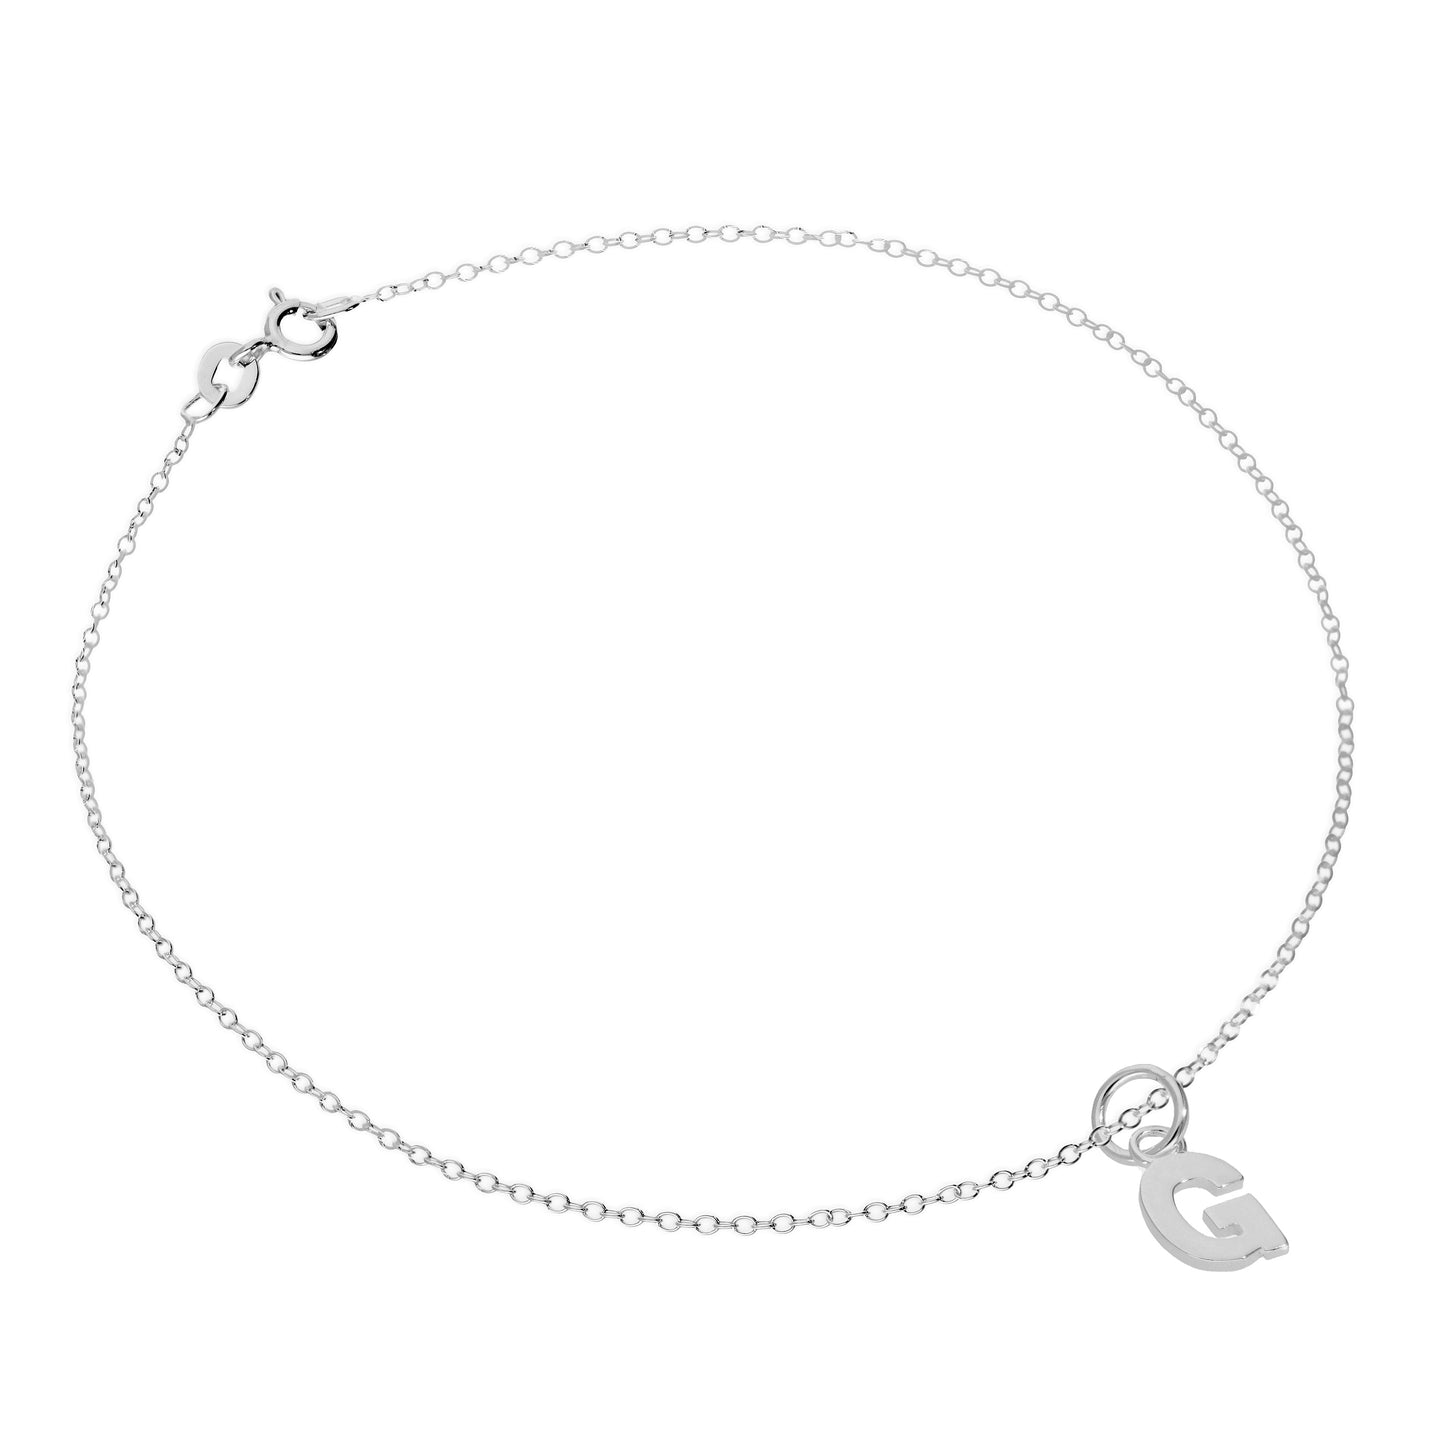 Fine Sterling Silver Belcher Anklet with Alphabet Letter Charm - 10 Inches - A-Z